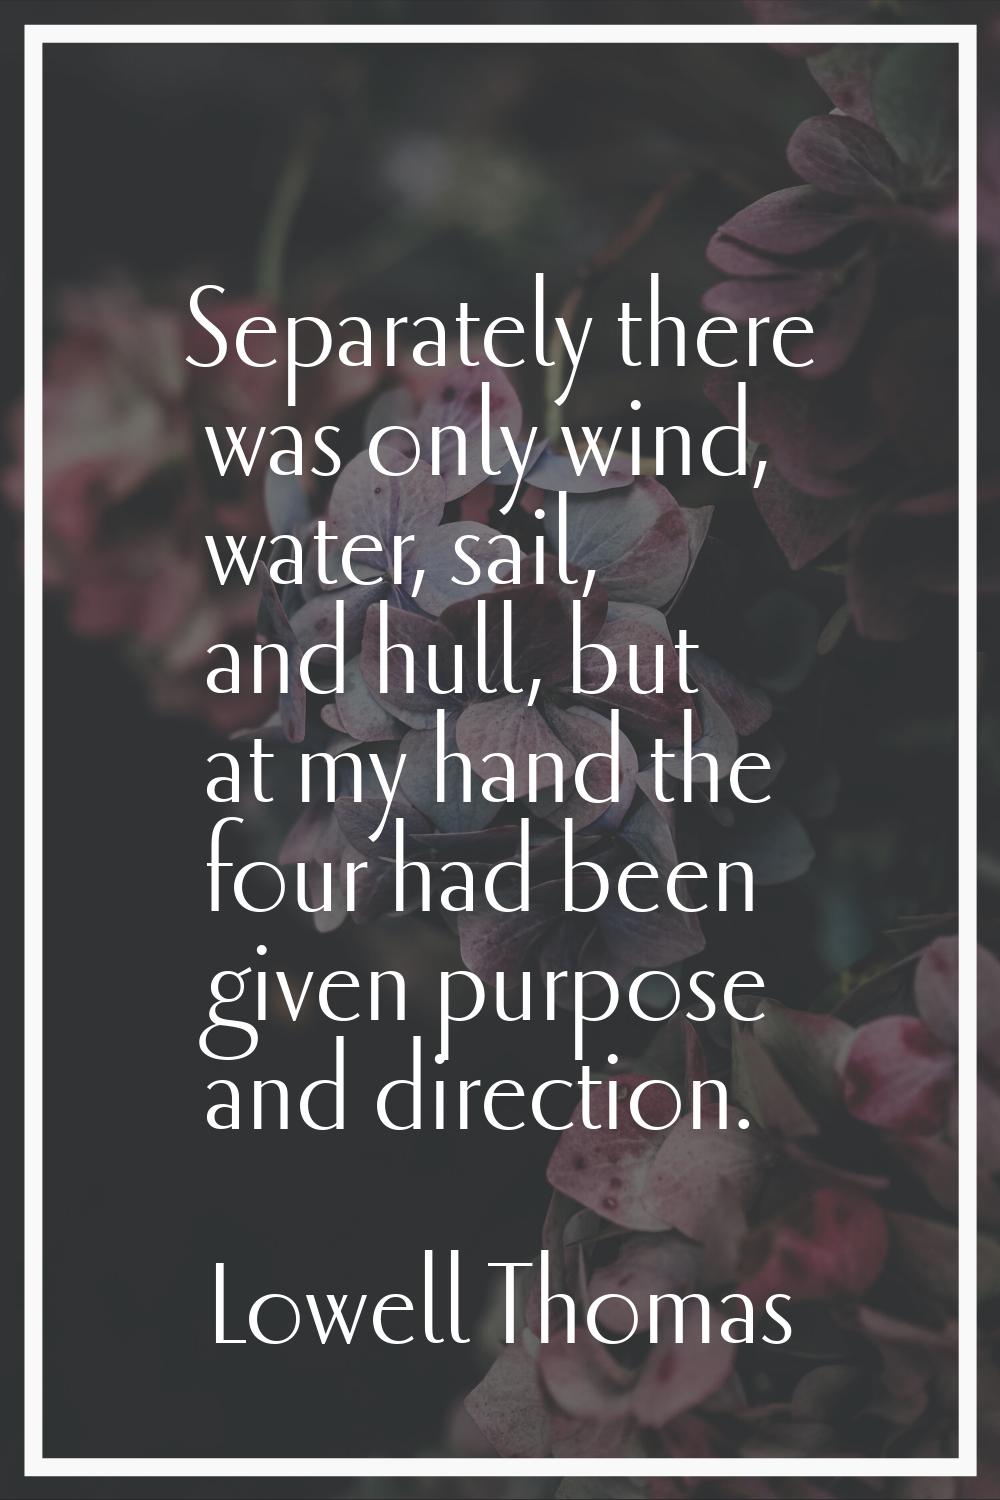 Separately there was only wind, water, sail, and hull, but at my hand the four had been given purpo